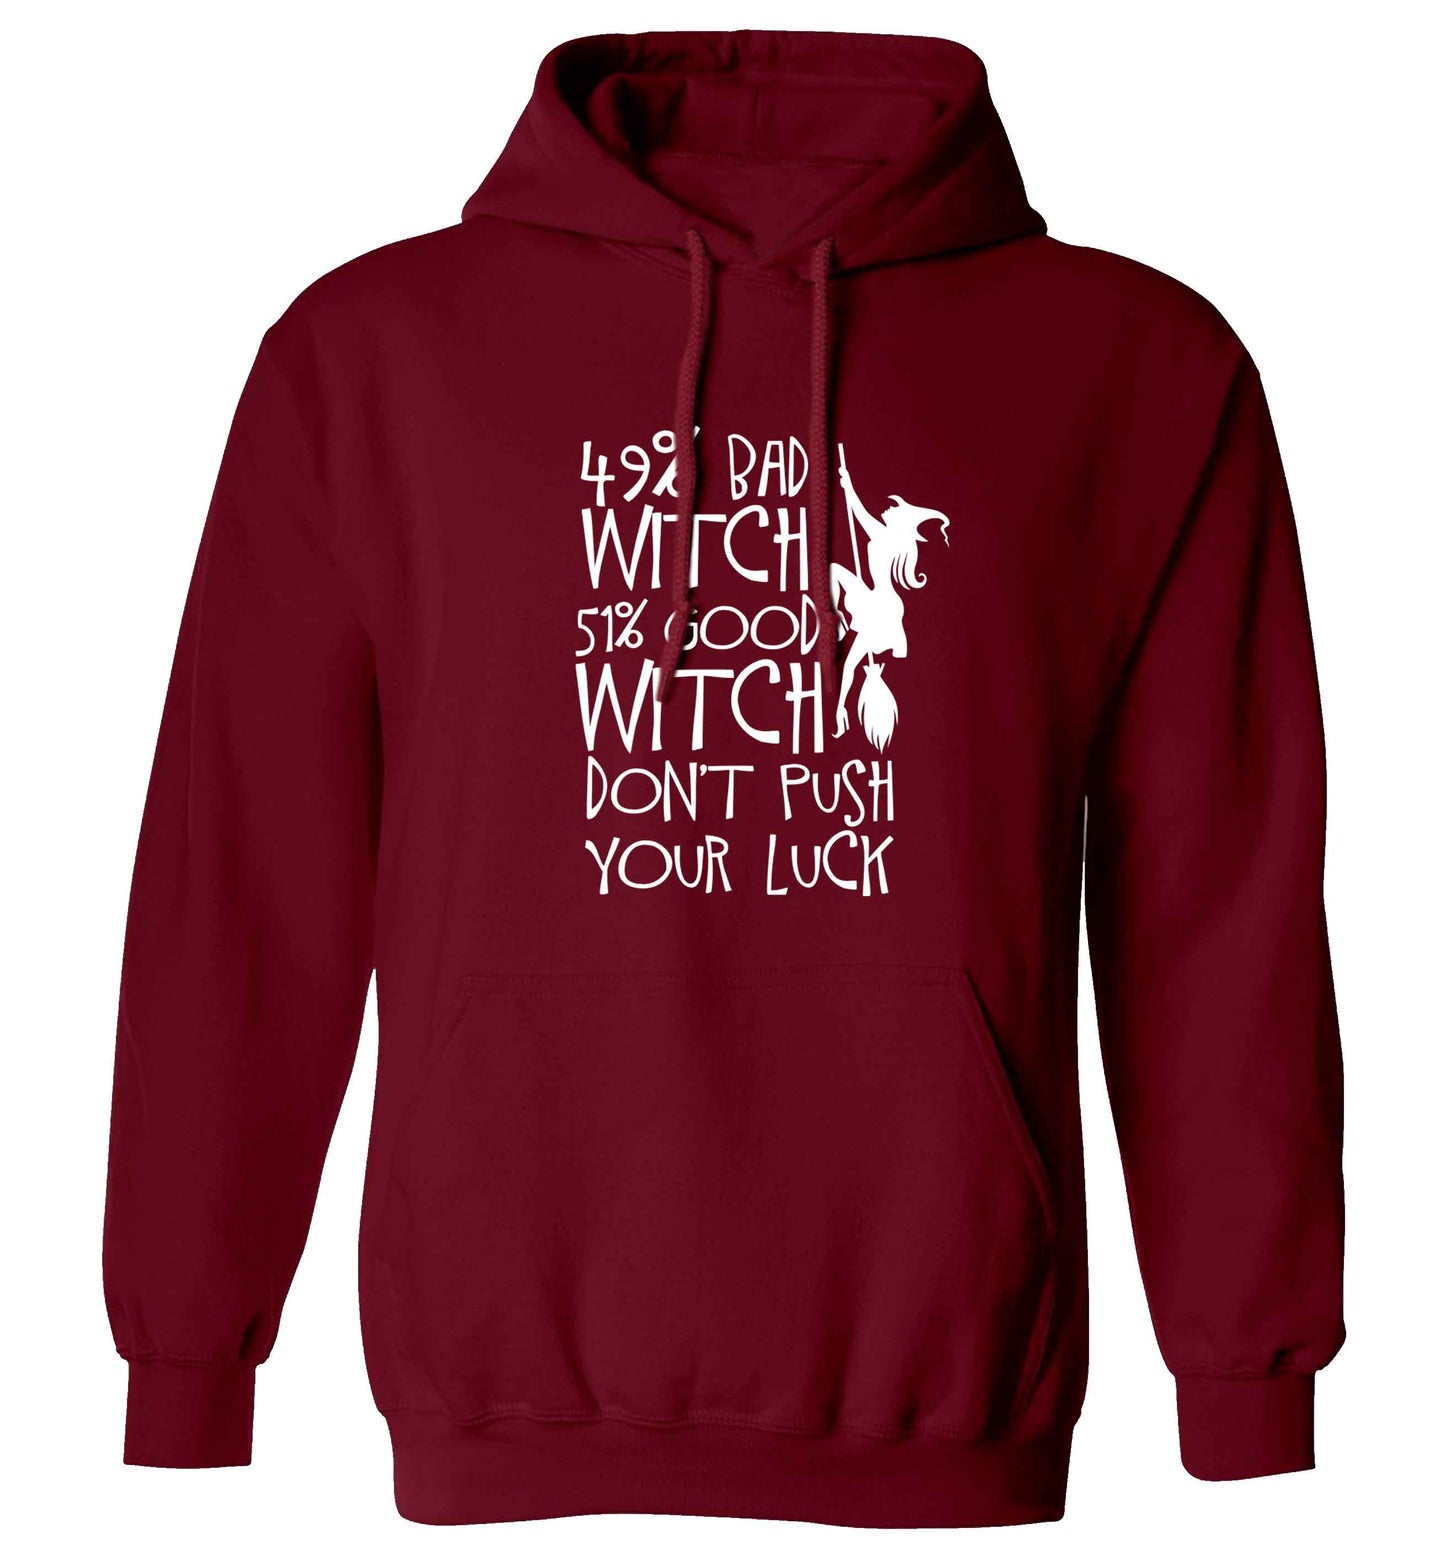 49% bad witch 51% good witch don't push your luck adults unisex maroon hoodie 2XL